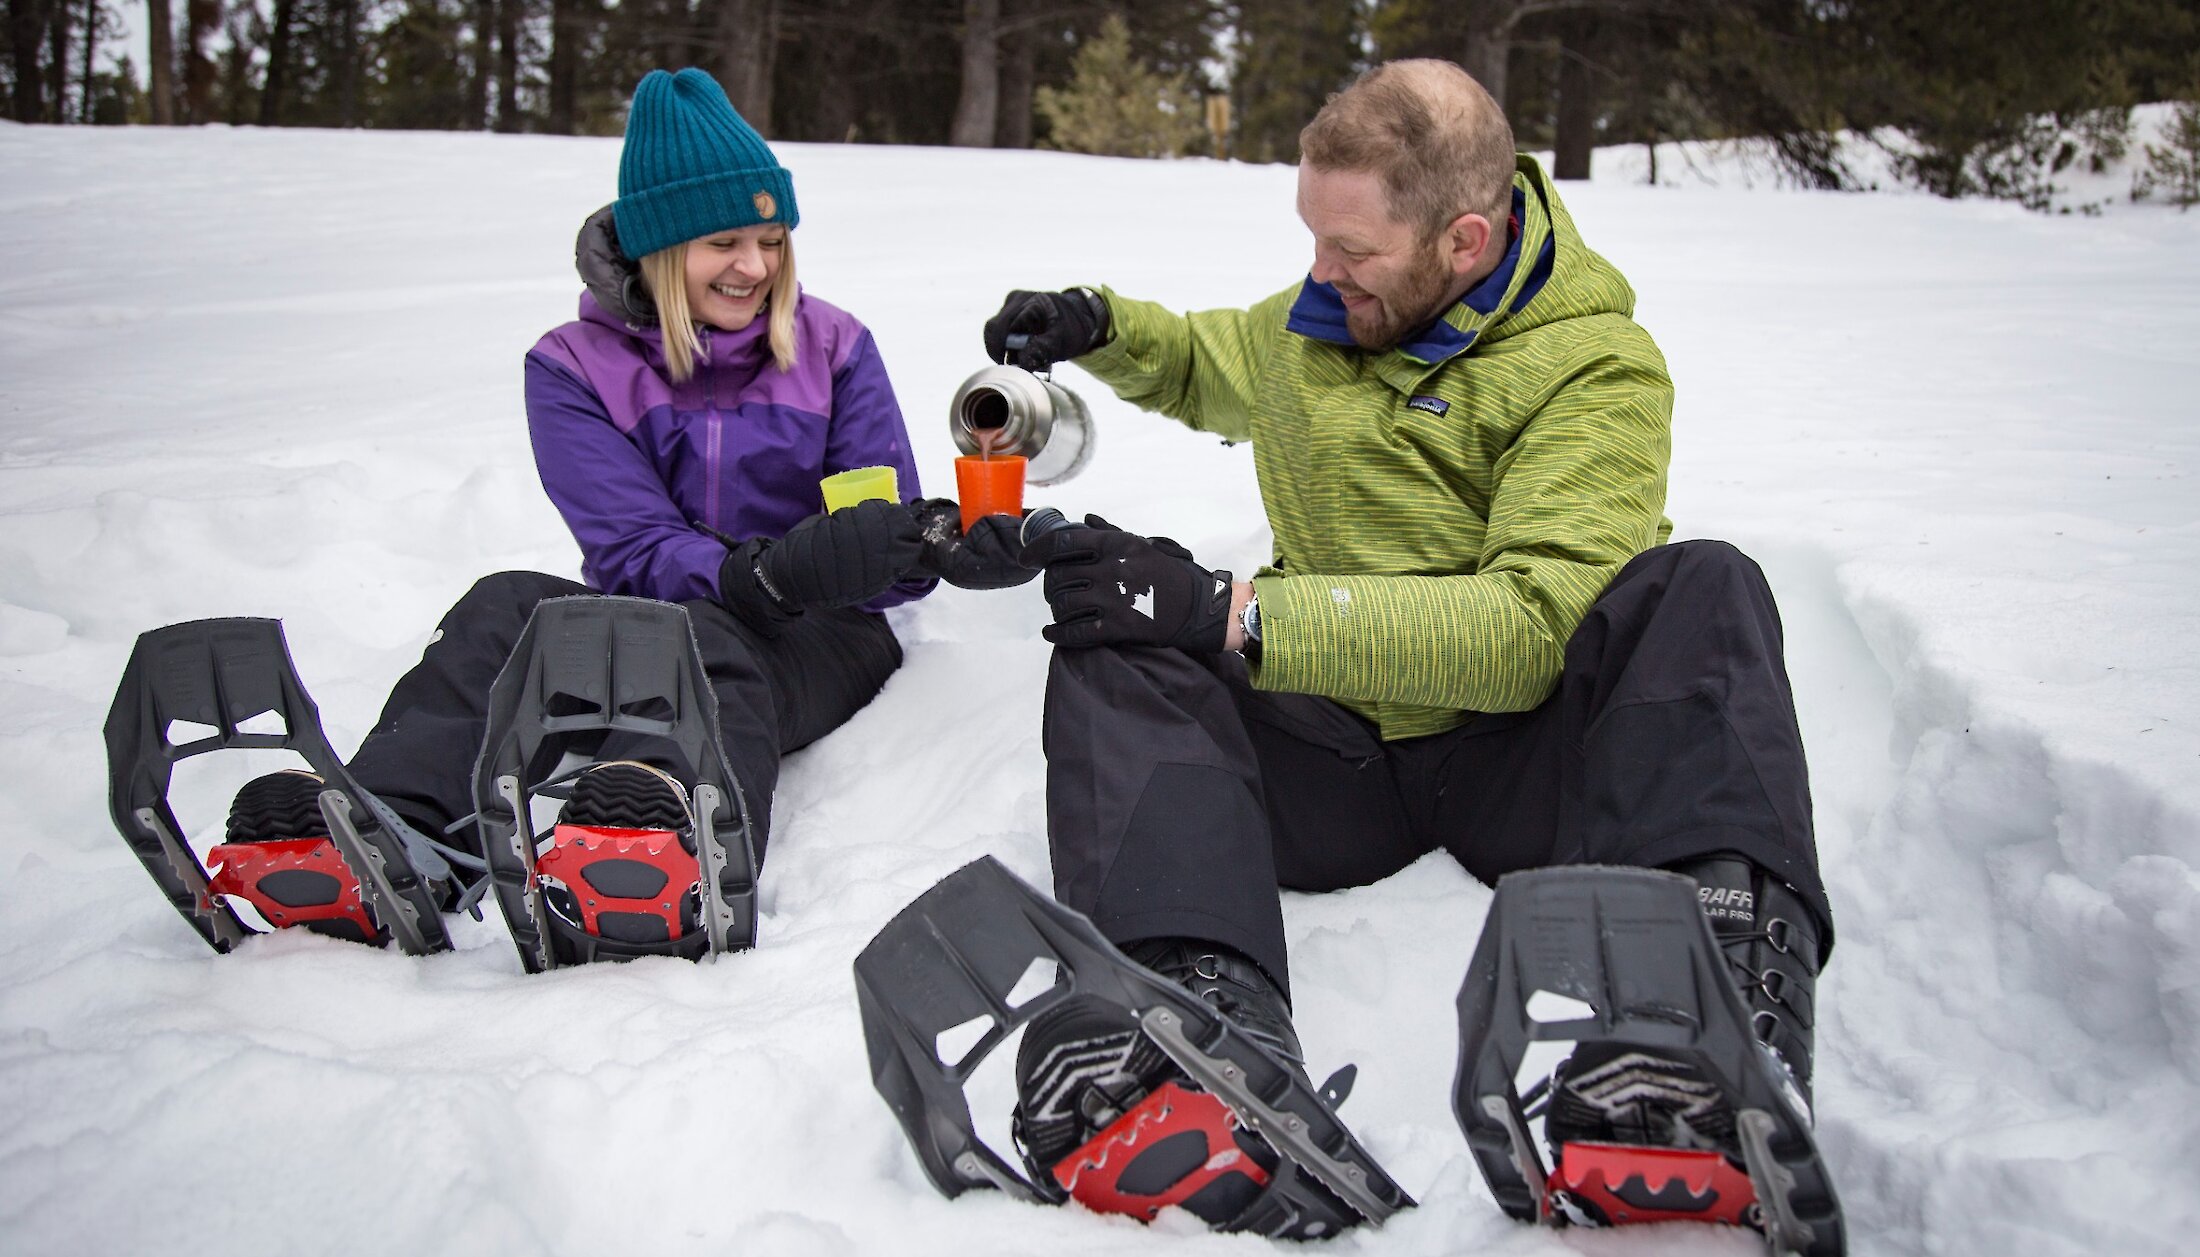 Two people sharing hot chocolate in the snow on the snowshoe tour